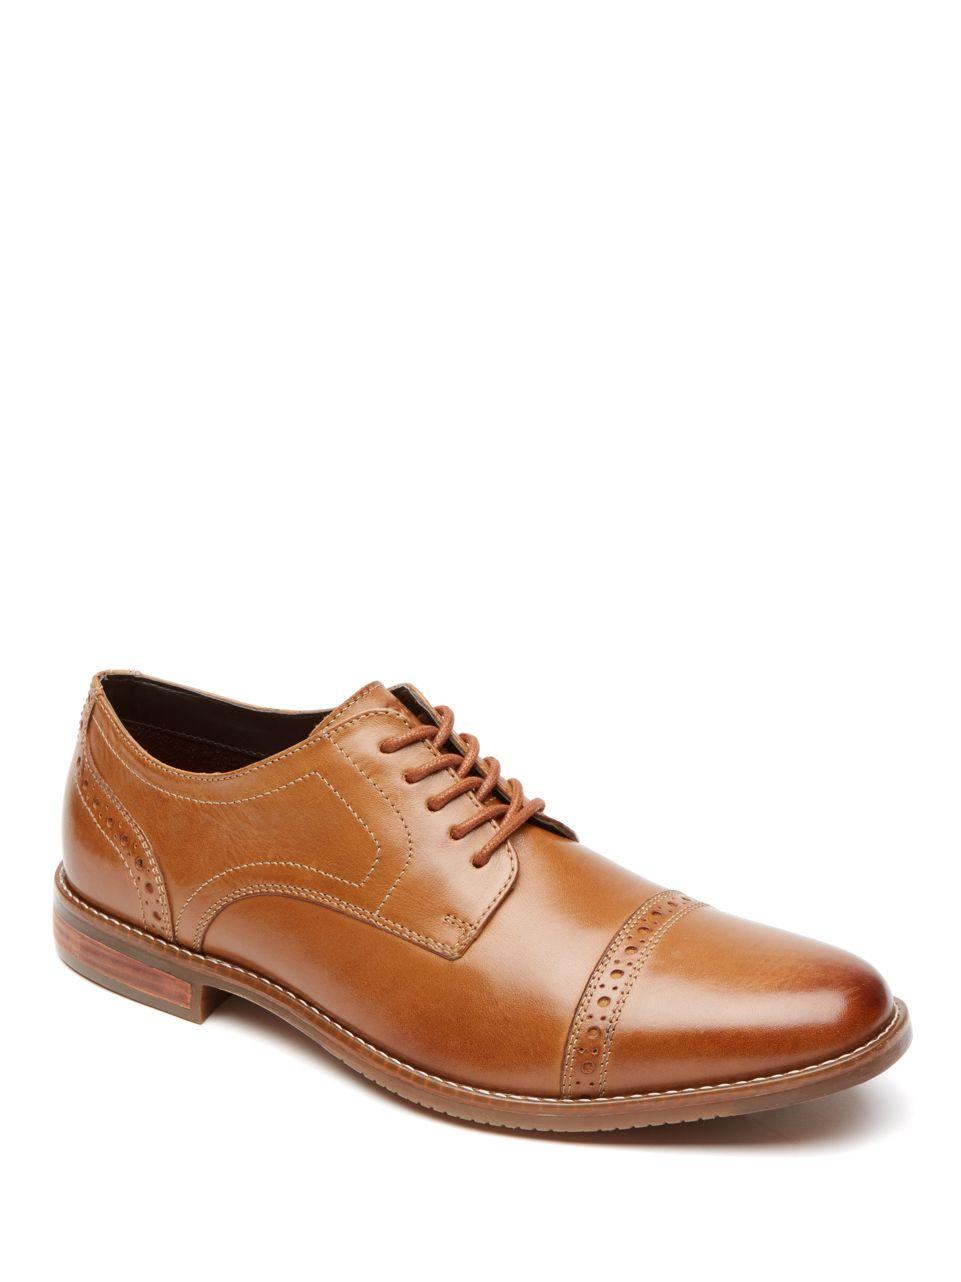 Lyst - Rockport Style Purpose Cap Toe Leather Shoes in Brown for Men